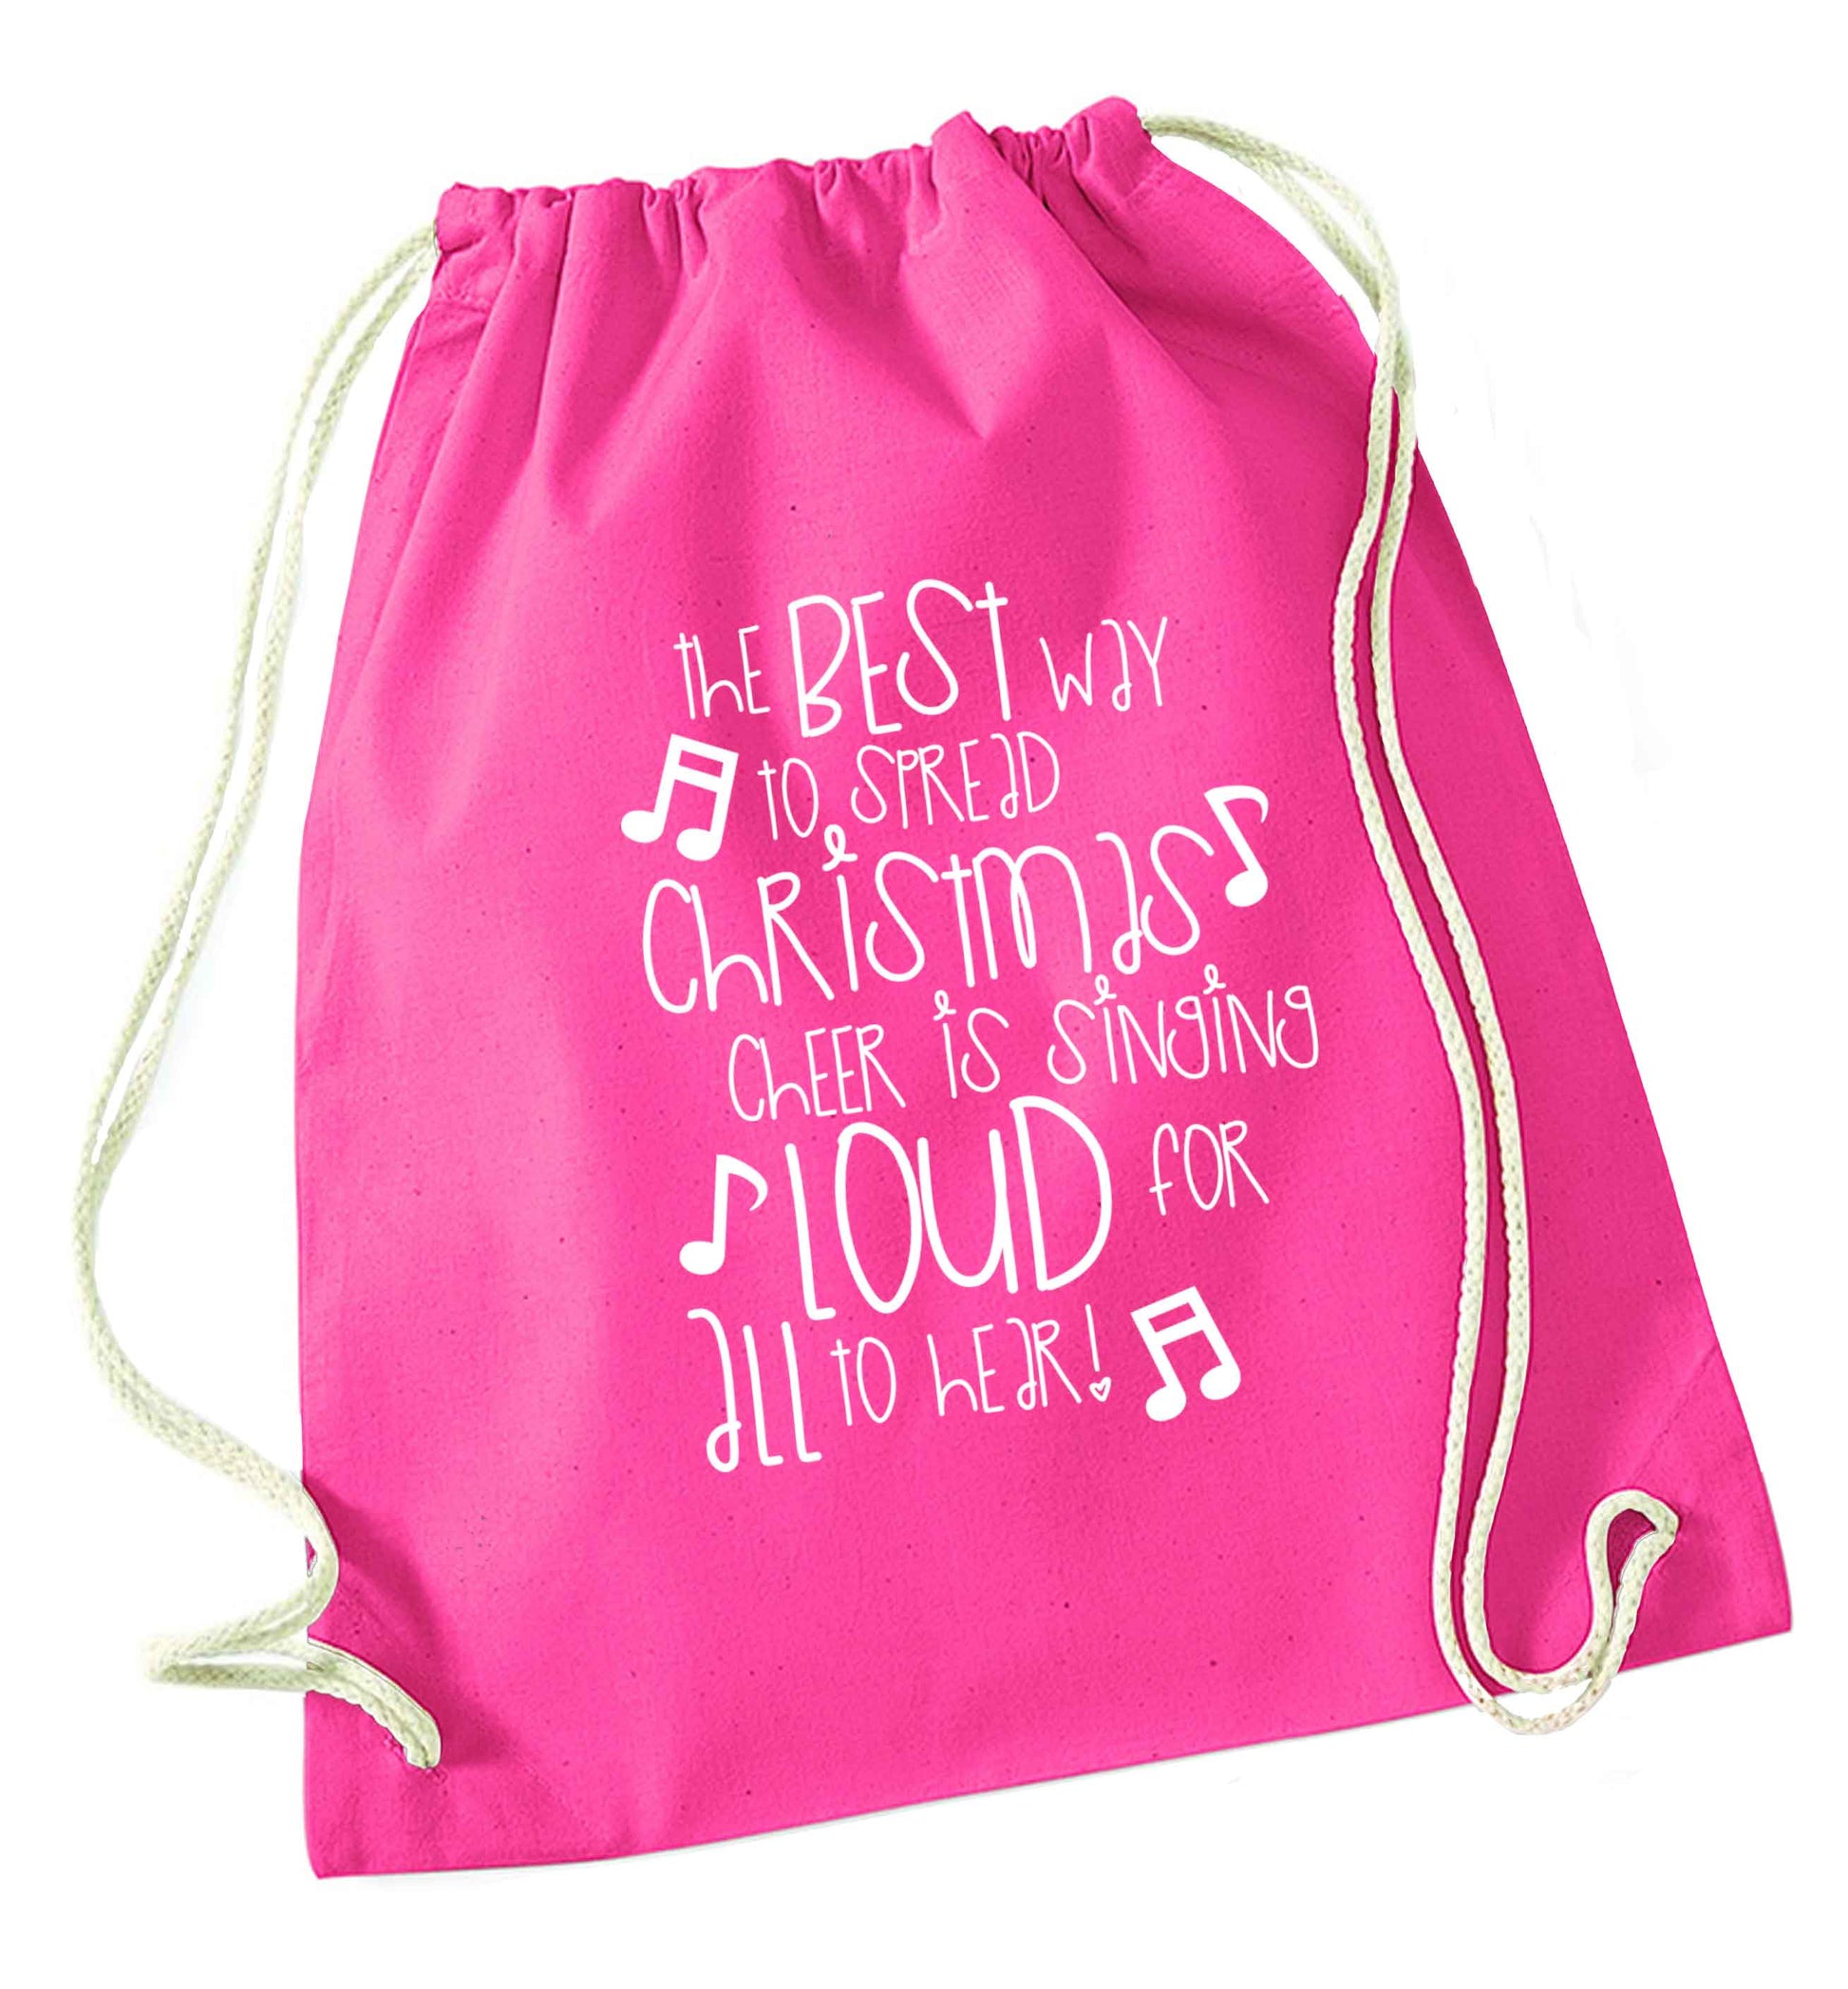 The best way to spread Christmas cheer is singing loud for all to hear pink drawstring bag